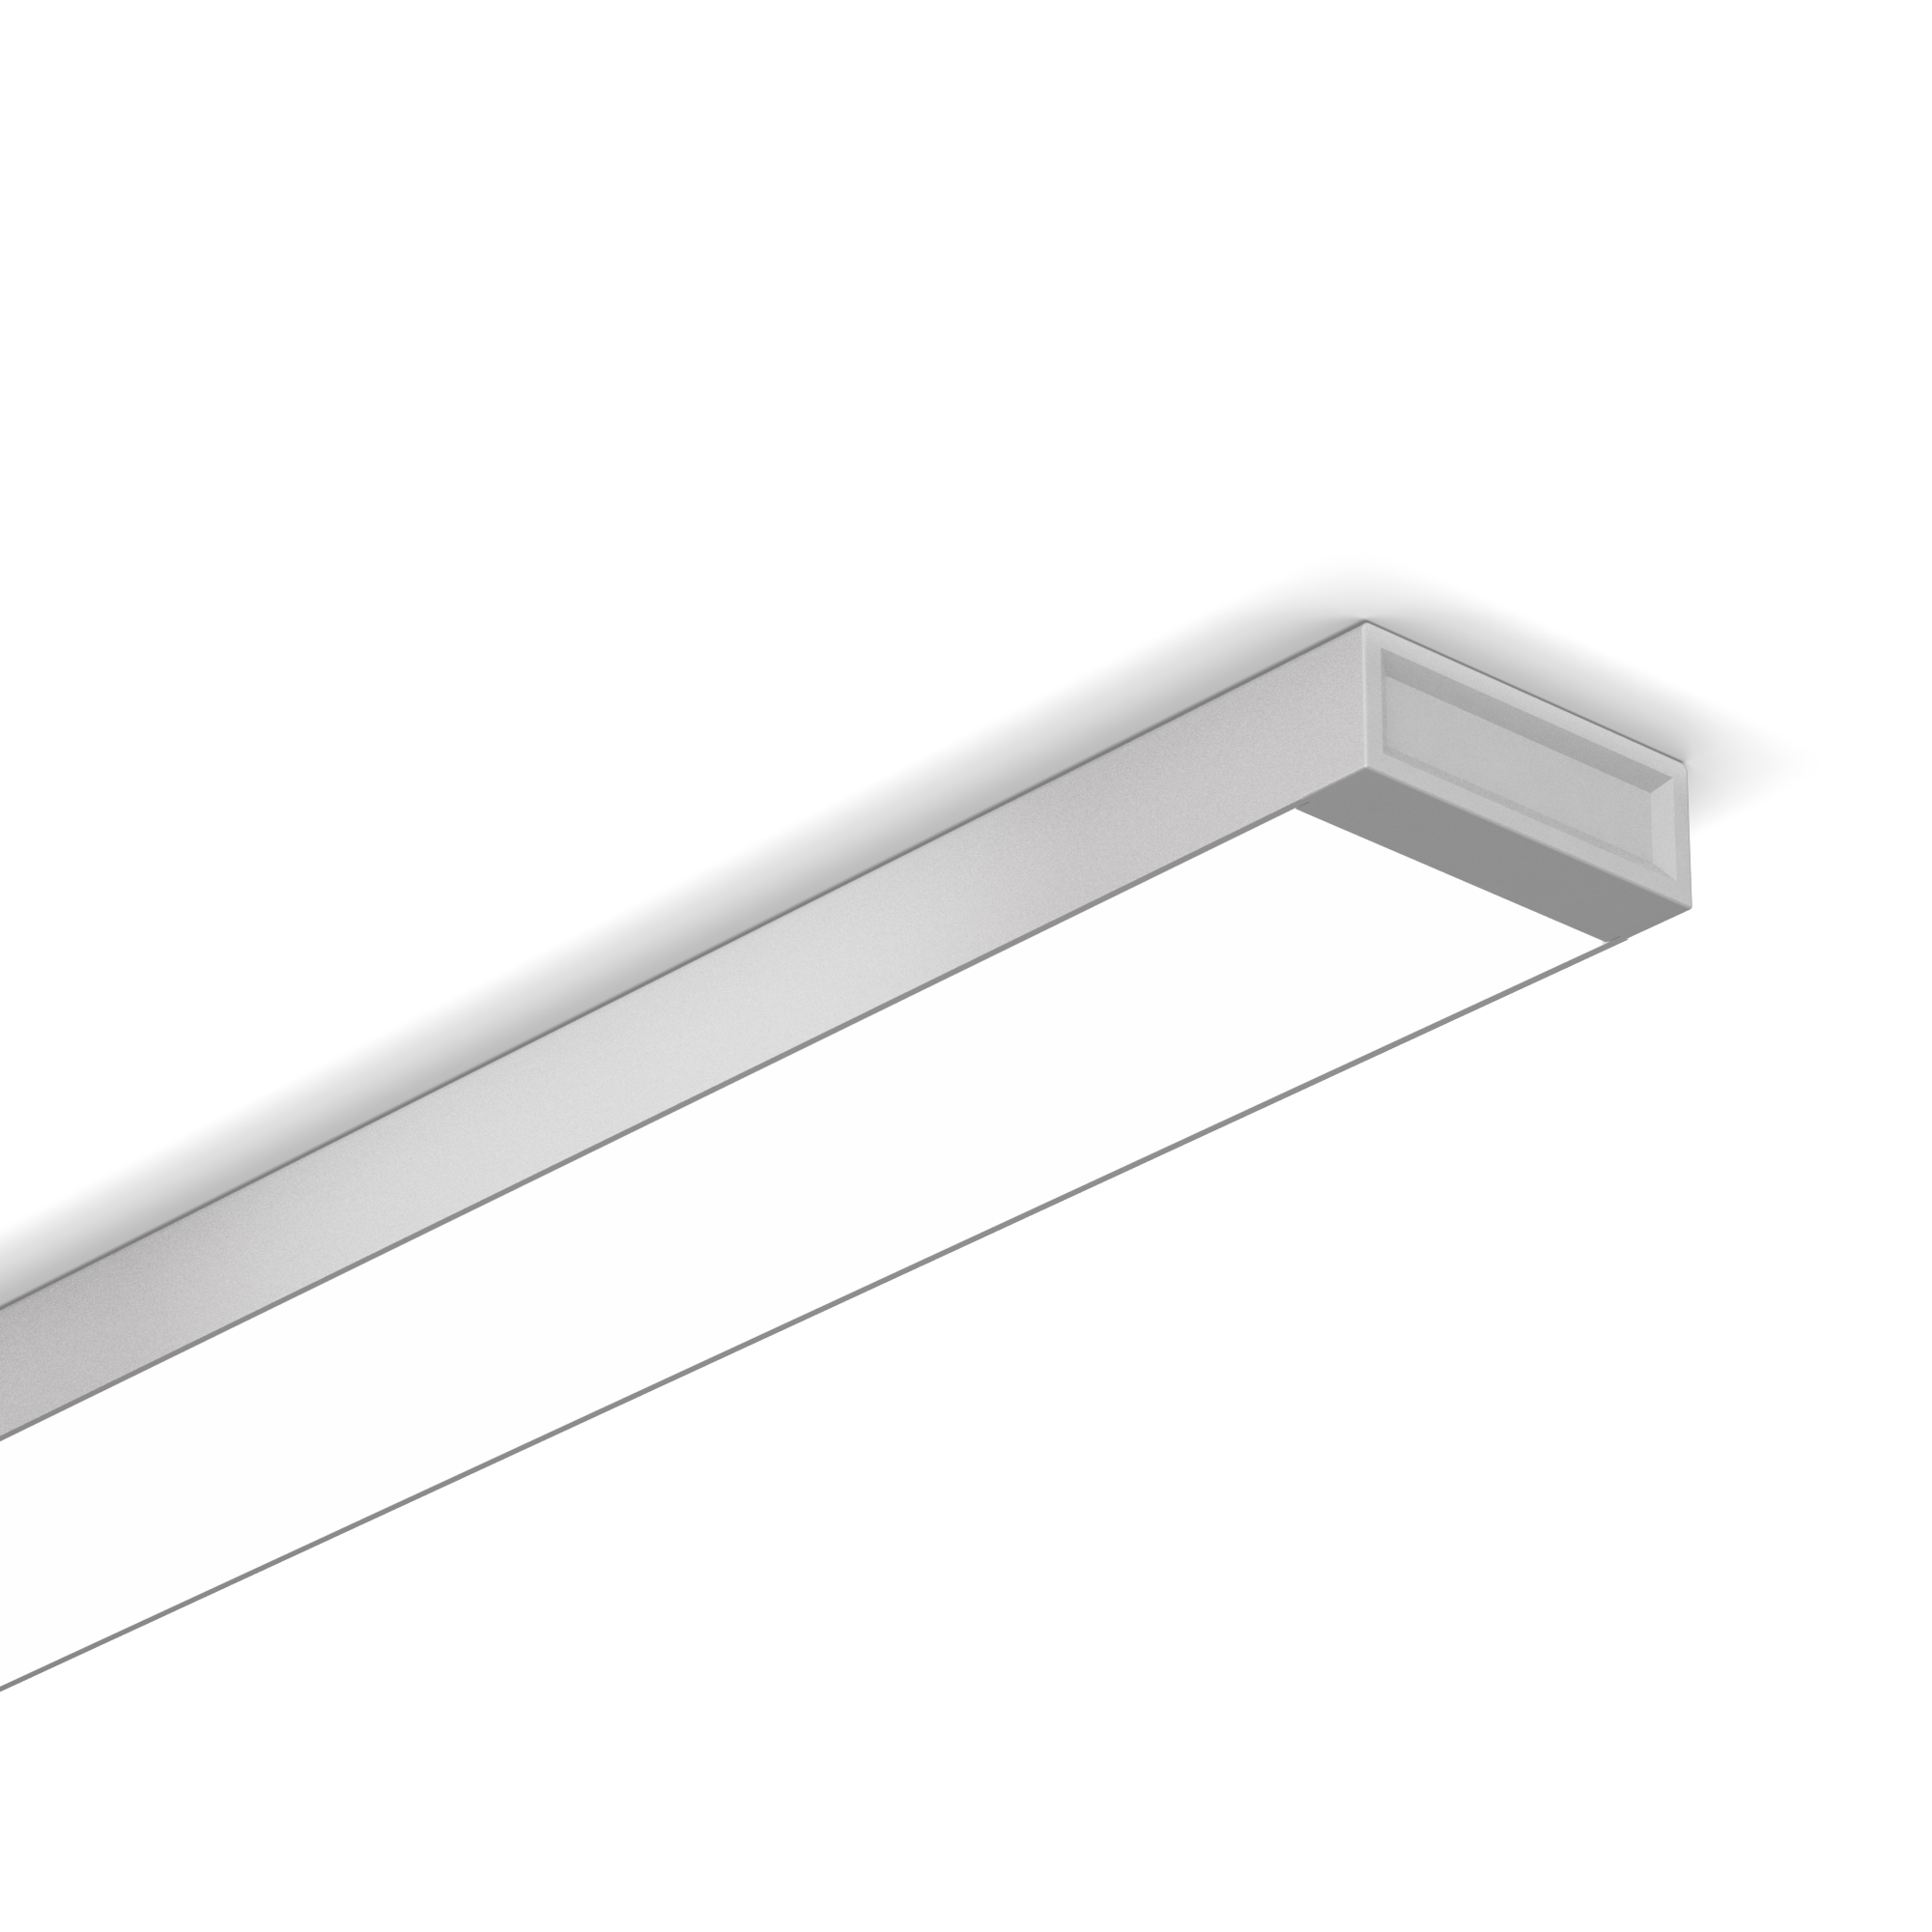 Edge-Lit Low-Profile LED Linear
EDGESolo 2.75 is an innovative low-profile surface-mounted LED luminaire designed to provide the perfect direct and indirect light. EDGE products all provide best-in-class efficiency and beam control options. Solo 275 is specification-grade with high lumen per foot, high CRI, and circadian options. Solo 275 incorporates an engineered LED light engine with fully customizable choices for lumen output, CCT, and CRI.

 

Rectangular profile: 2.75” (70mm) x 0.98” (25mm)